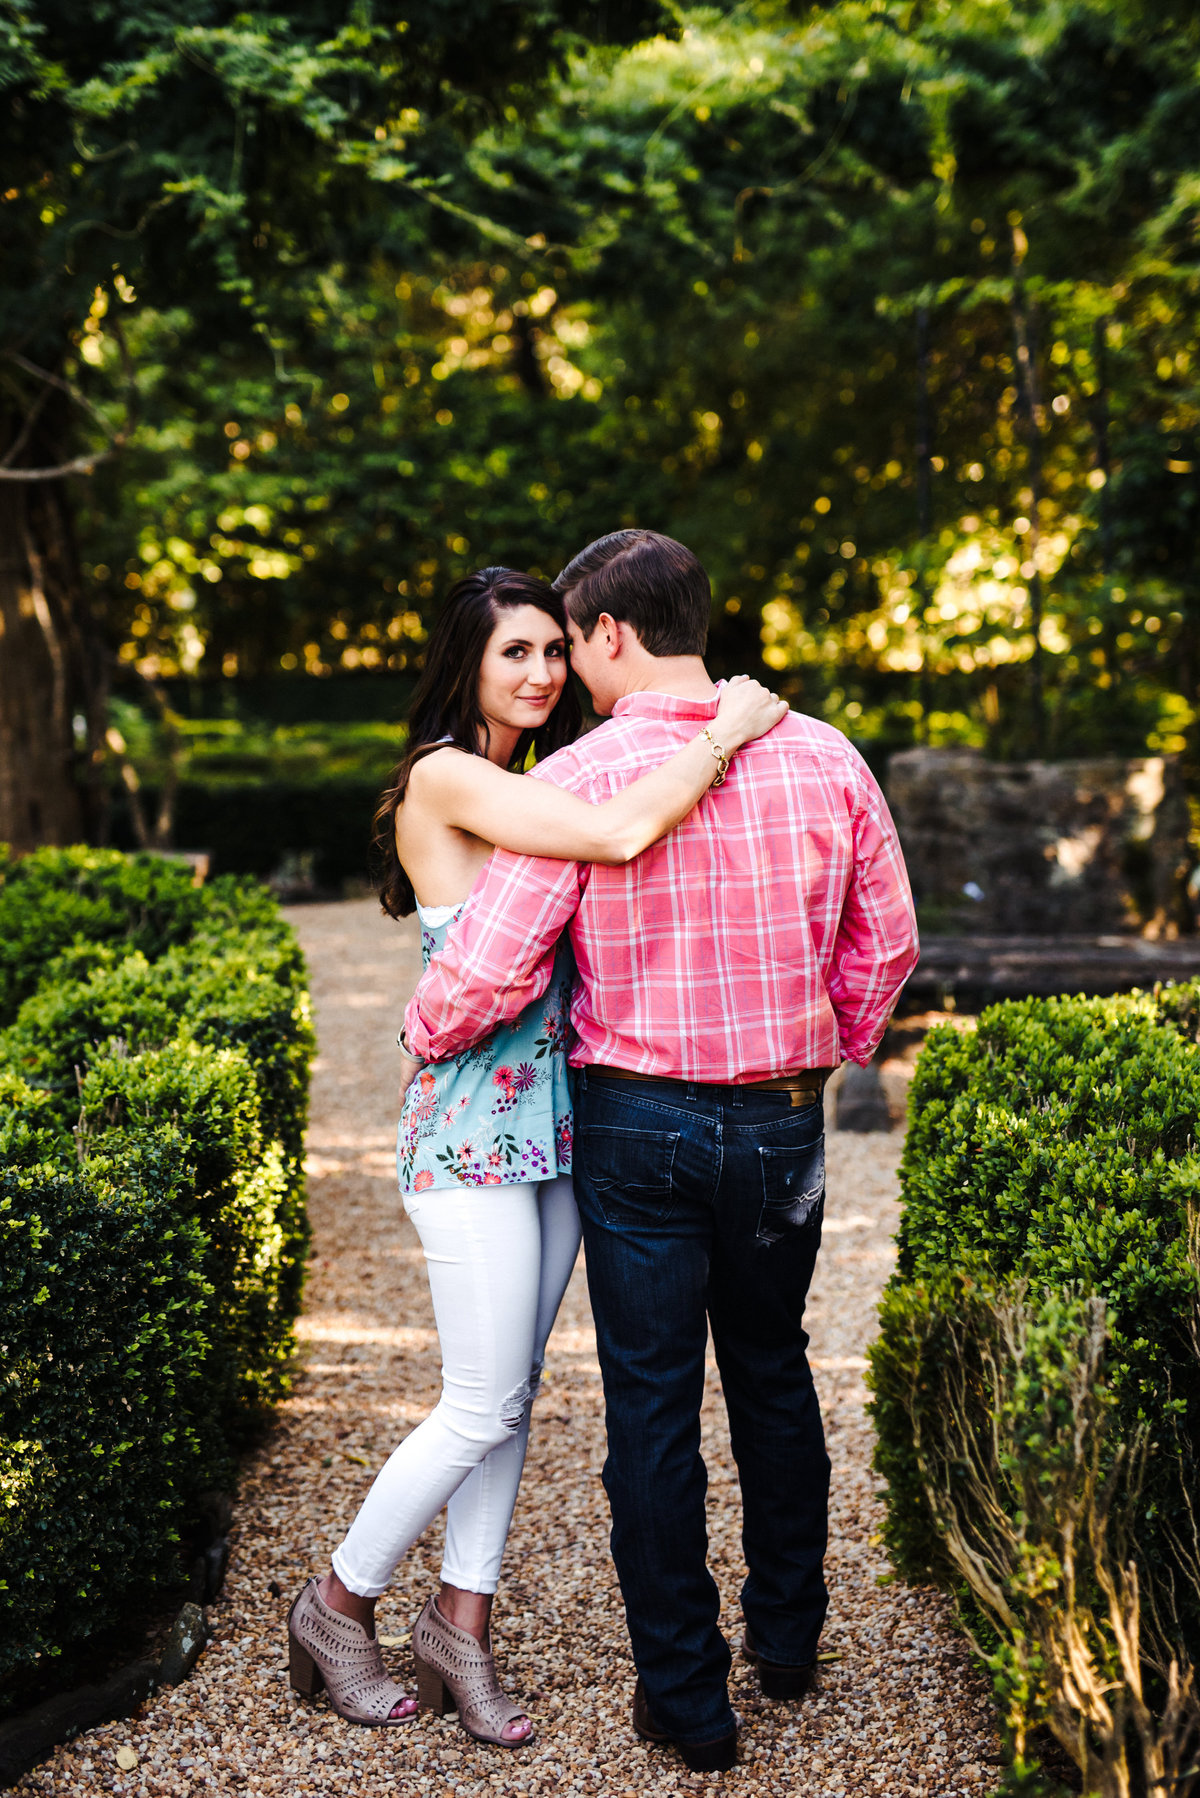 Hills and Dales Estate Engagement Session - 10